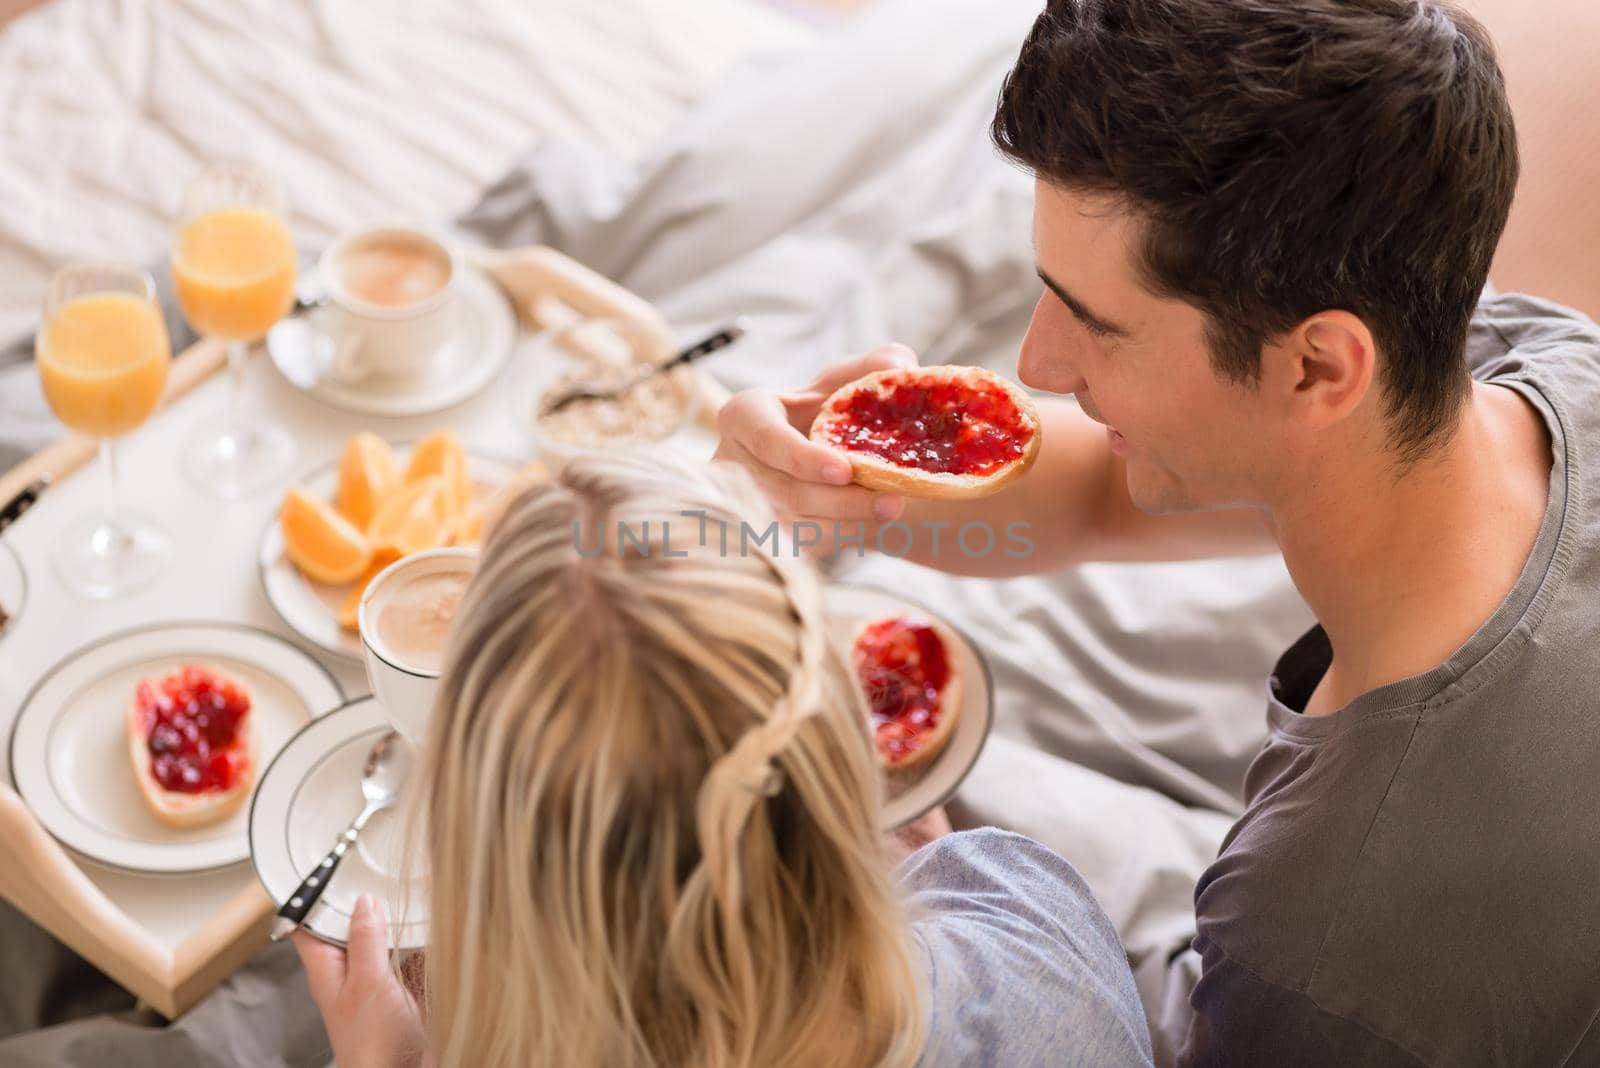 Husband and wife sharing a relaxing breakfast by Kzenon